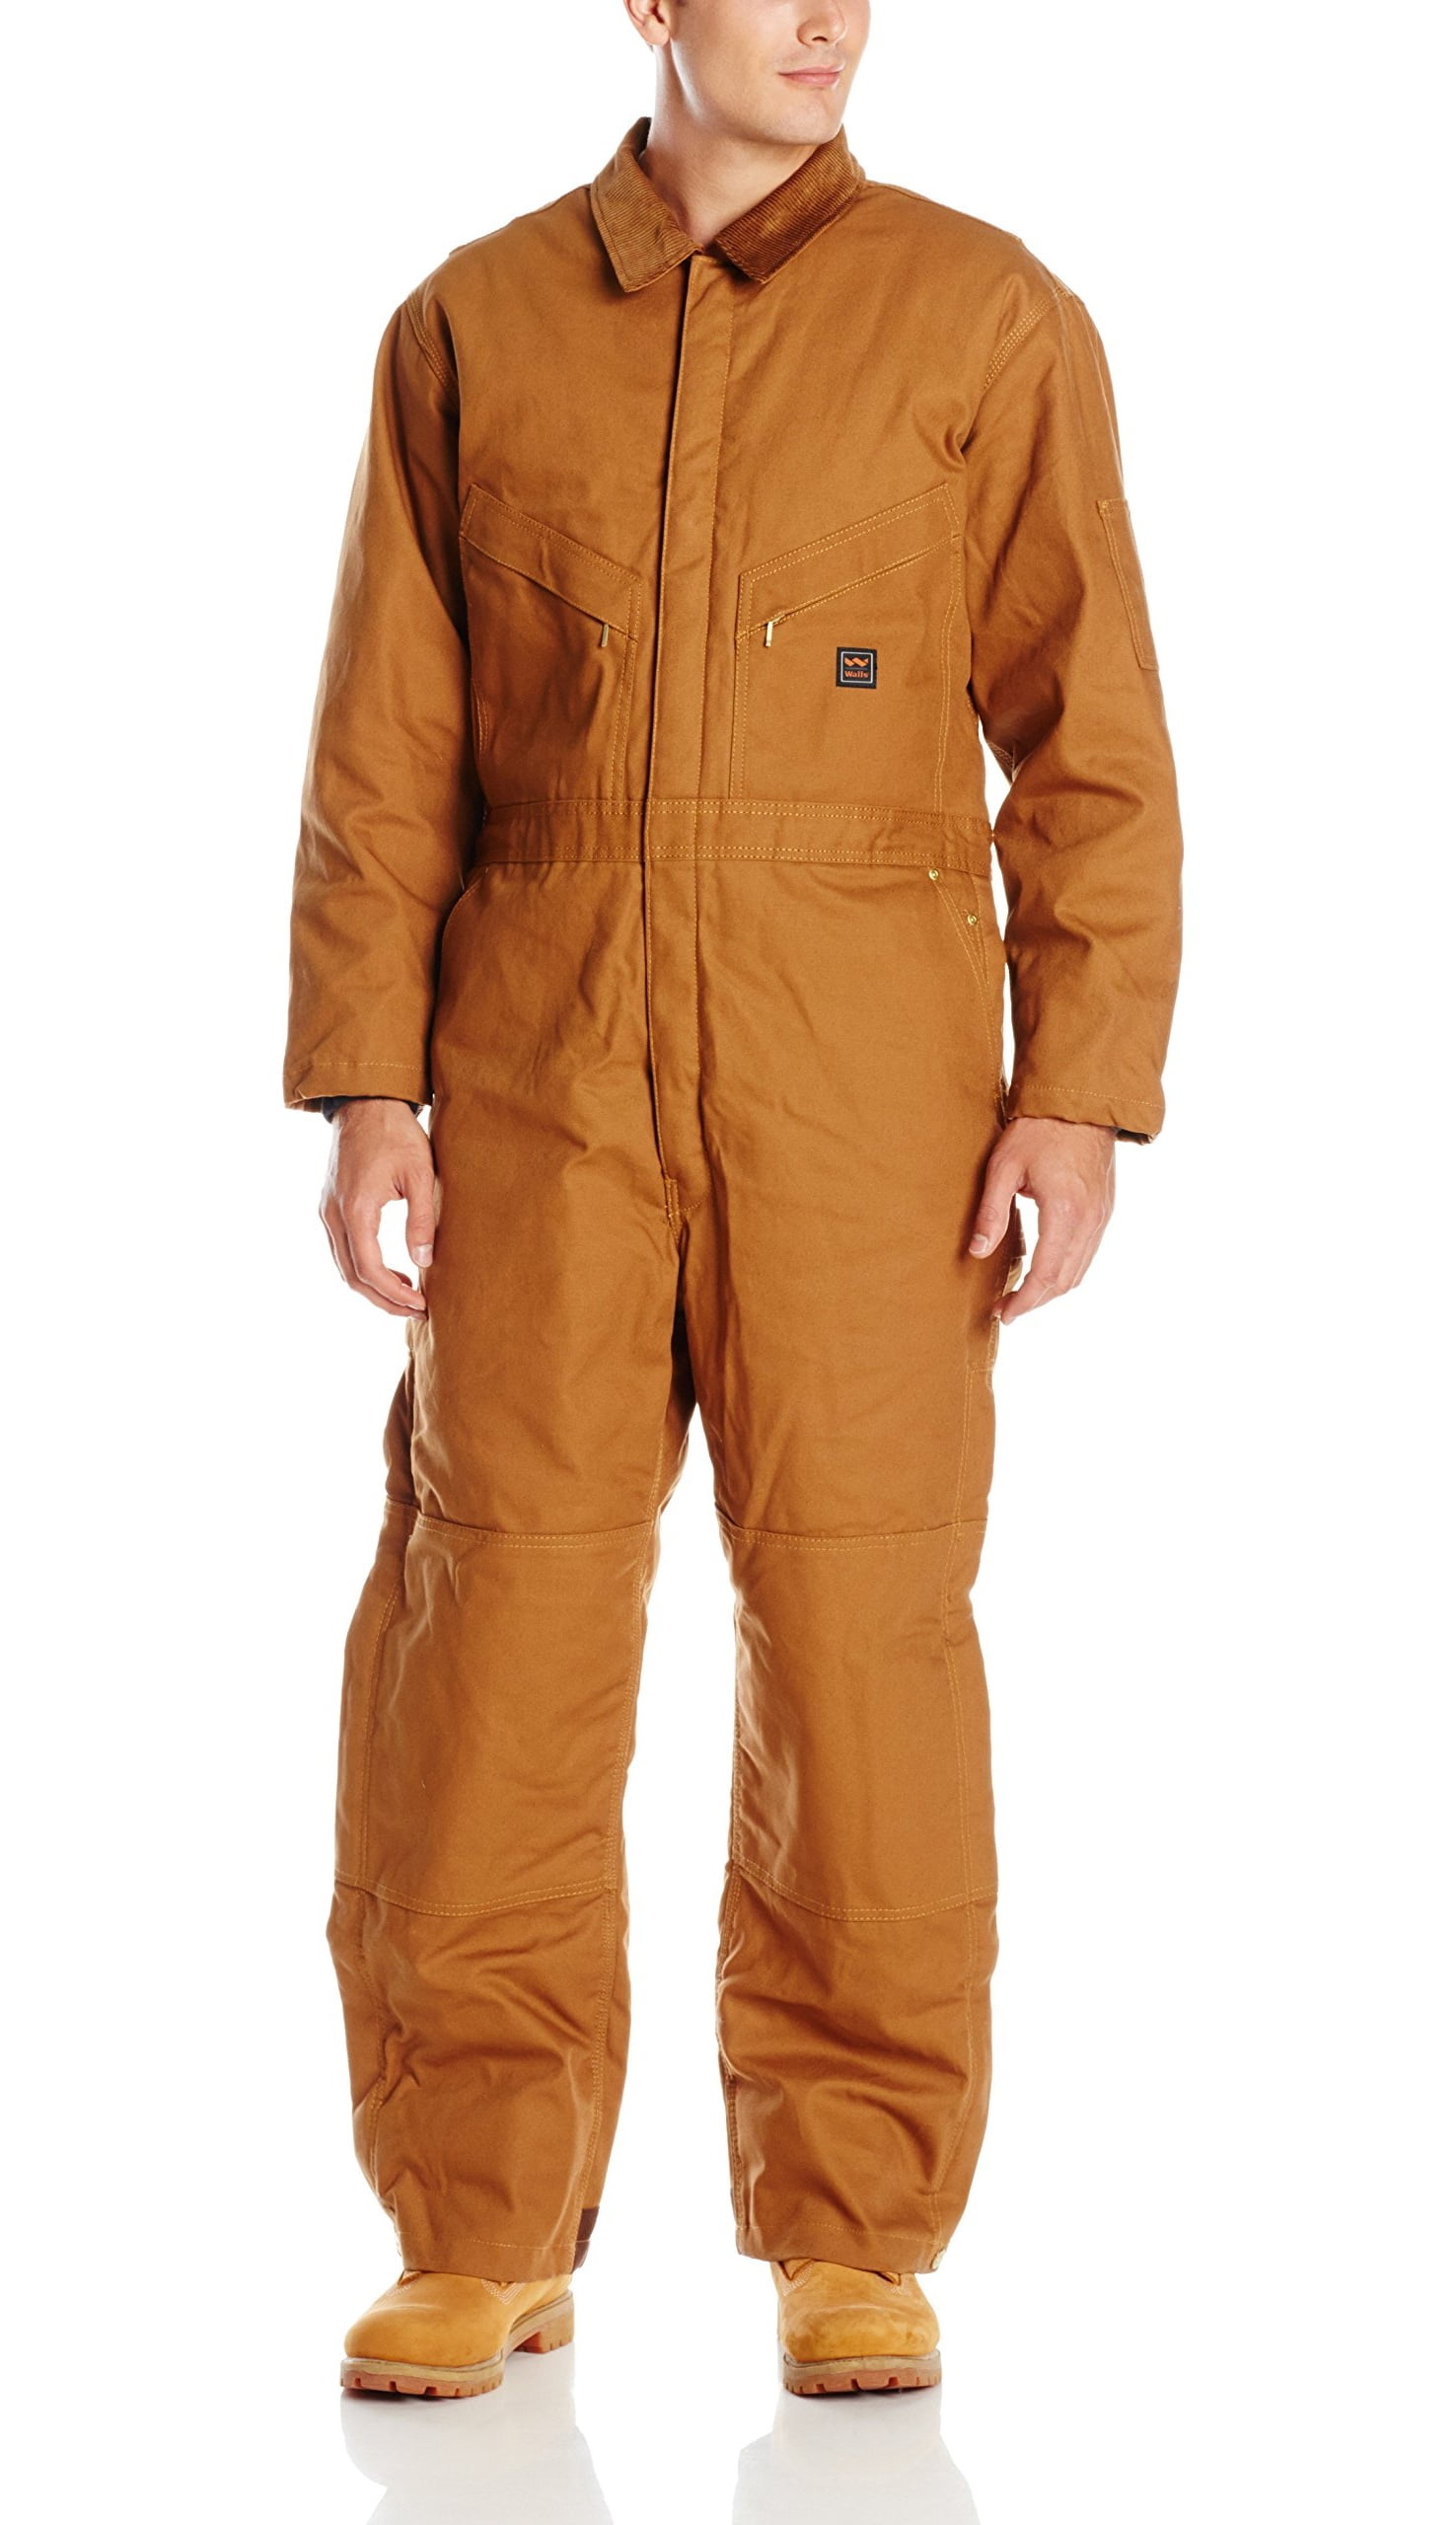 88302 Insulated Water/Windproof Coveralls